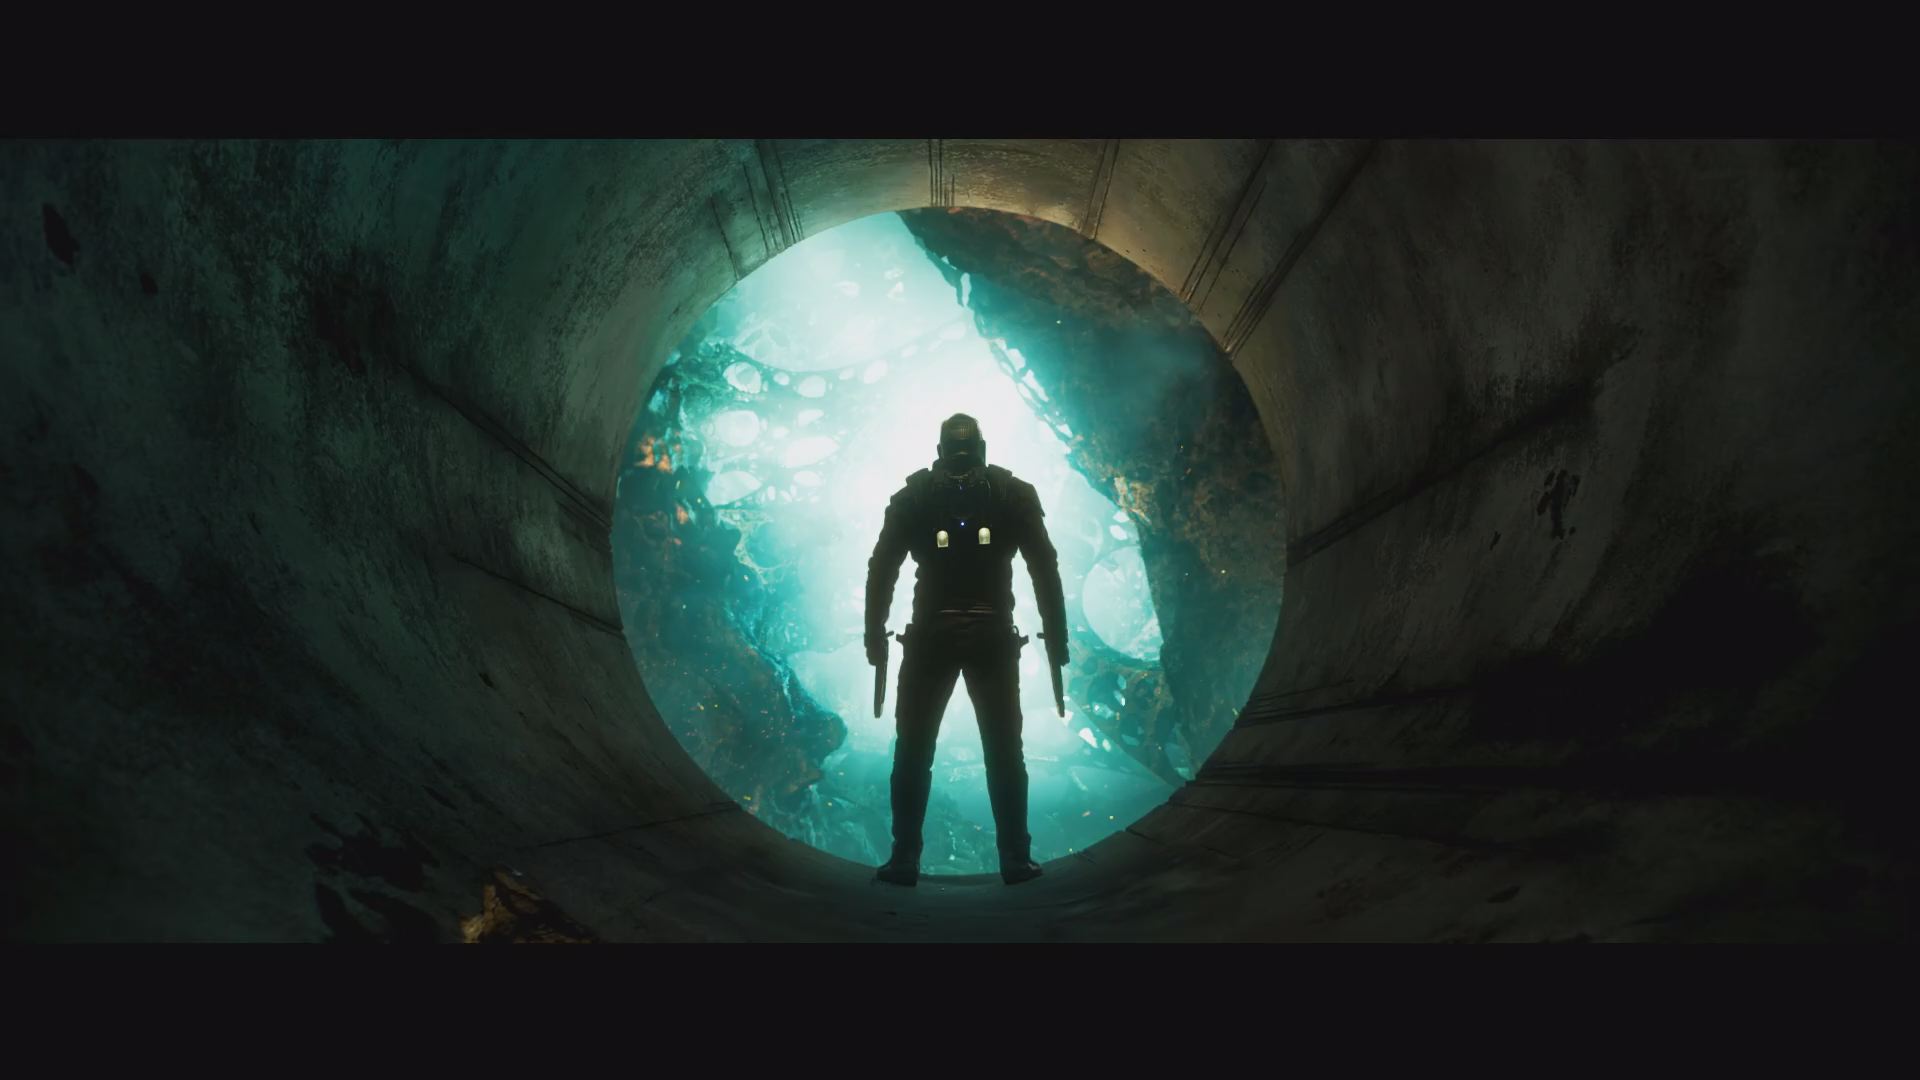 5 Things To Love About the New Guardians Teaser Trailer